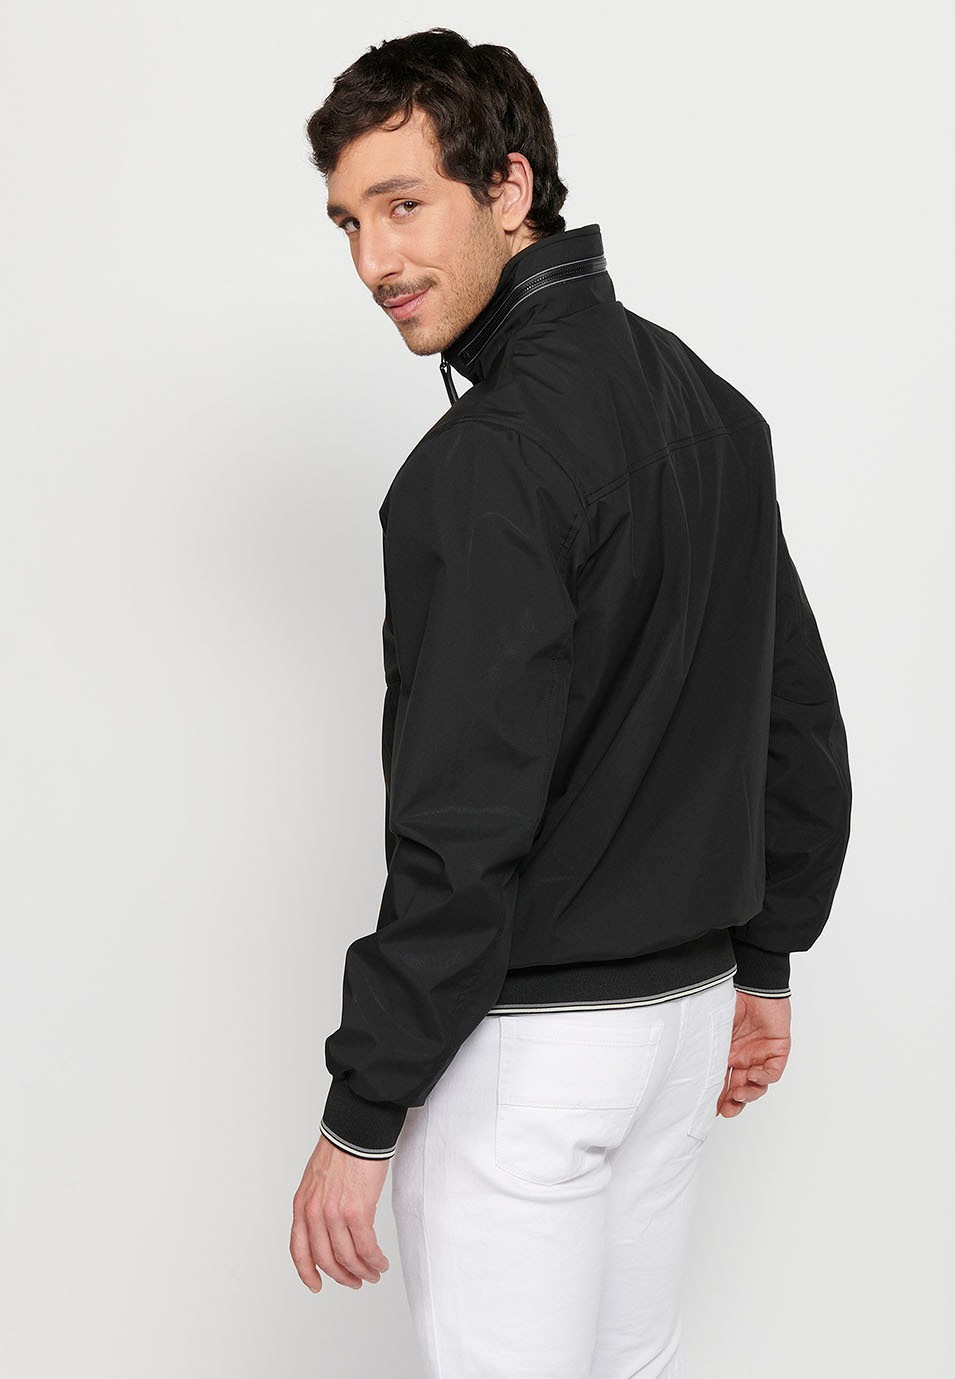 Long-sleeved high-neck windbreaker jacket with front zipper closure and ribbed finishes with pockets, one inside in Black for Men 6